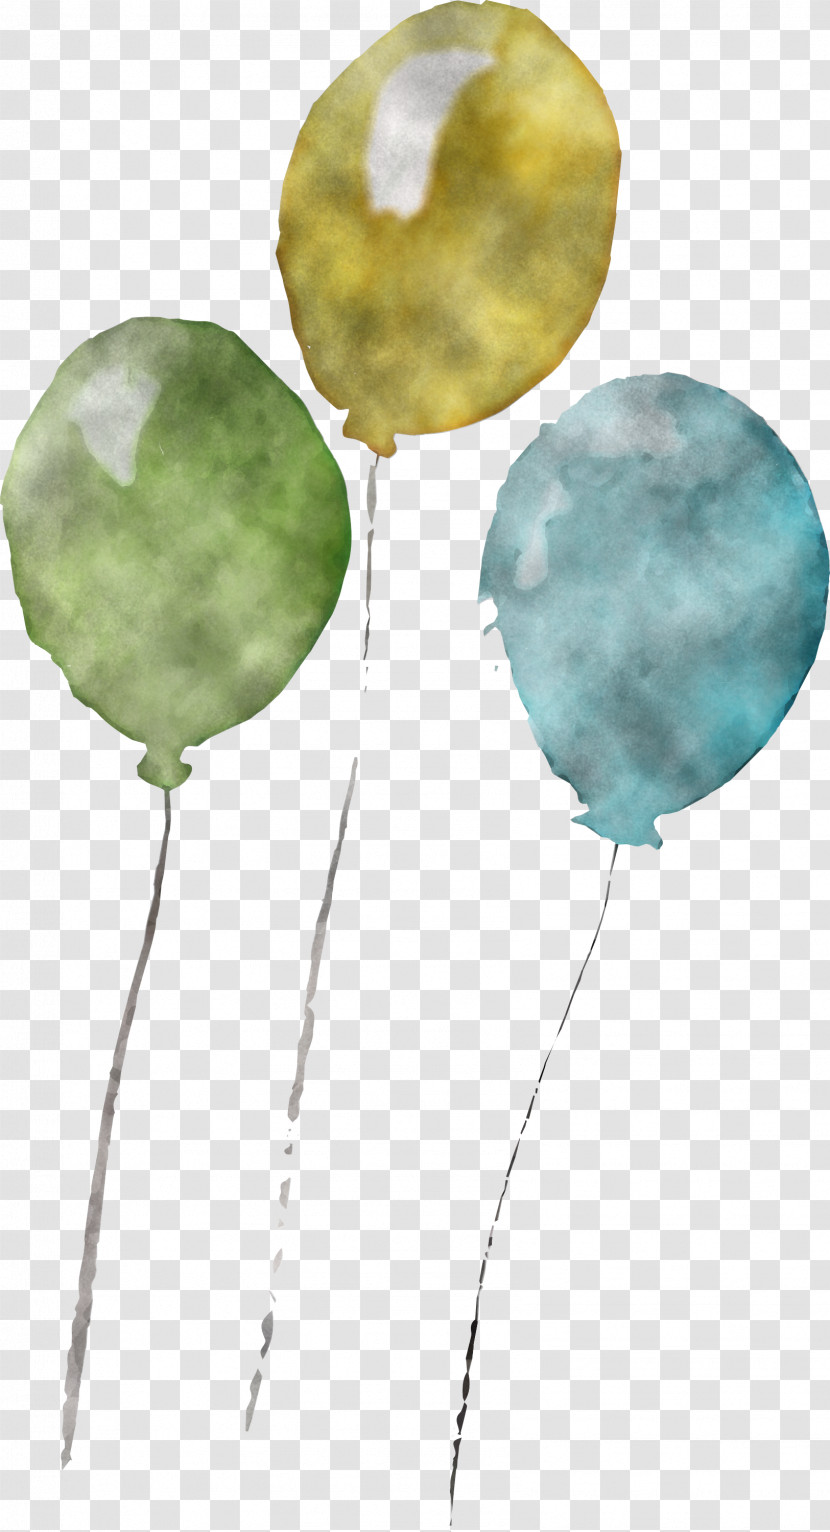 Green Leaf Turquoise Balloon Plant Transparent PNG